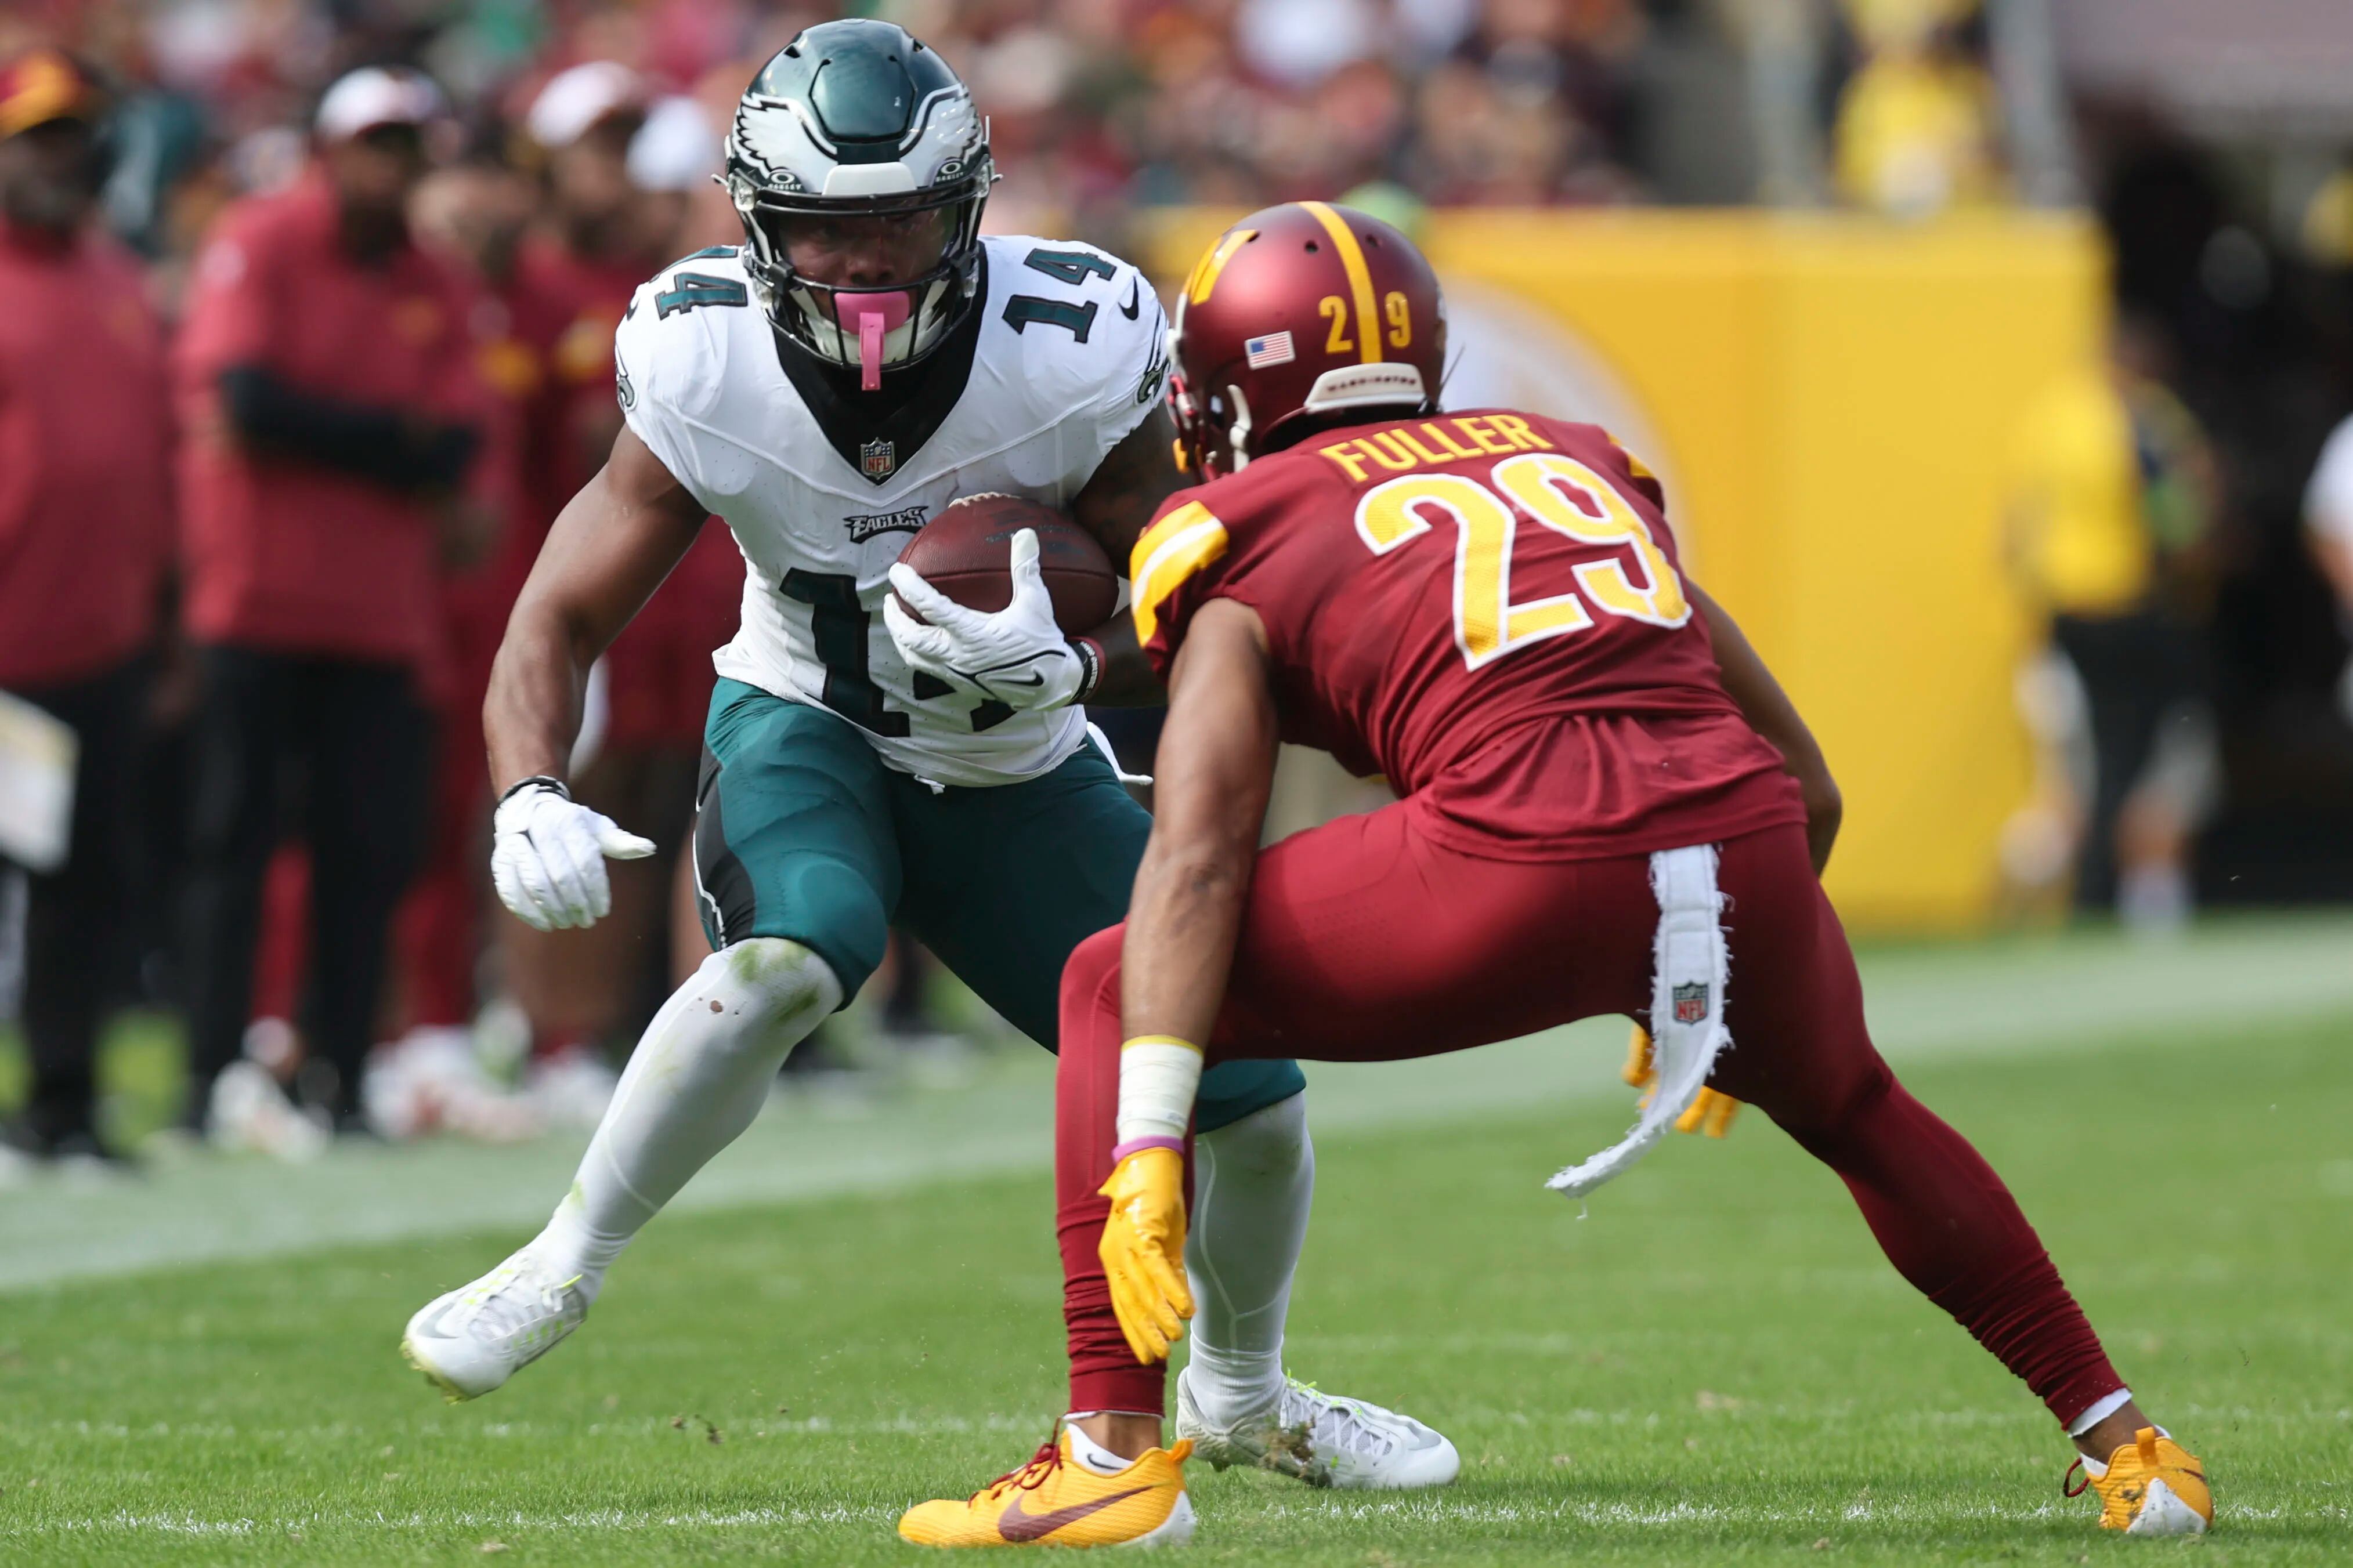 Jalen Carter suffers back injury in Eagles vs. Commanders game